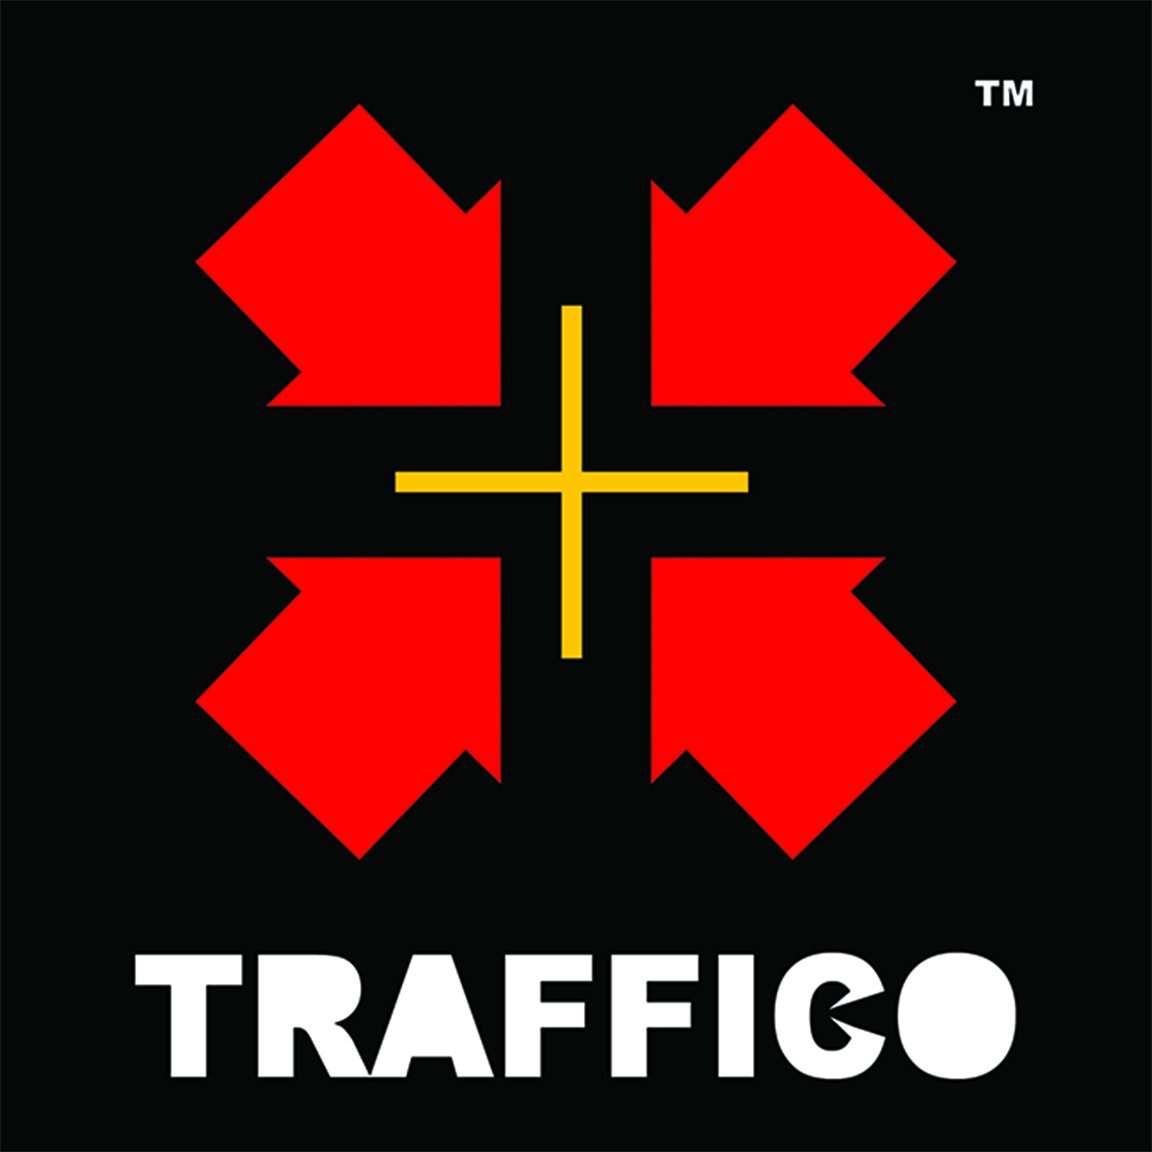 TRAFFICO is a startup company based in Bhubaneswar, the capital of Odisha. Odisha is strategically located on the shores of Bay of Bengal in Eastern India.